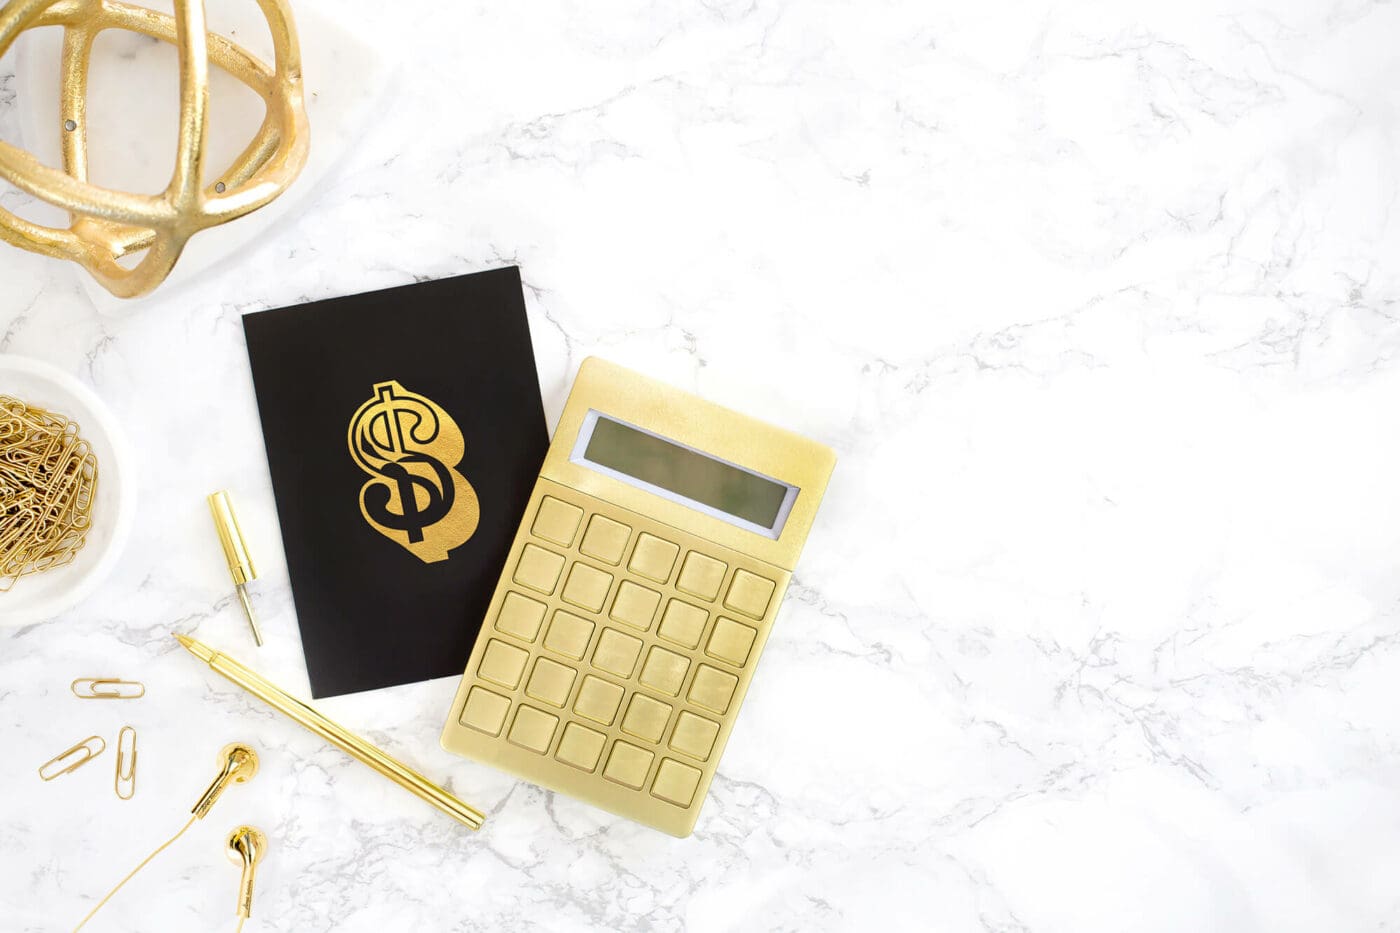 Guide to Pricing Coaching Services - a calculator next to a card with a dollar sign.